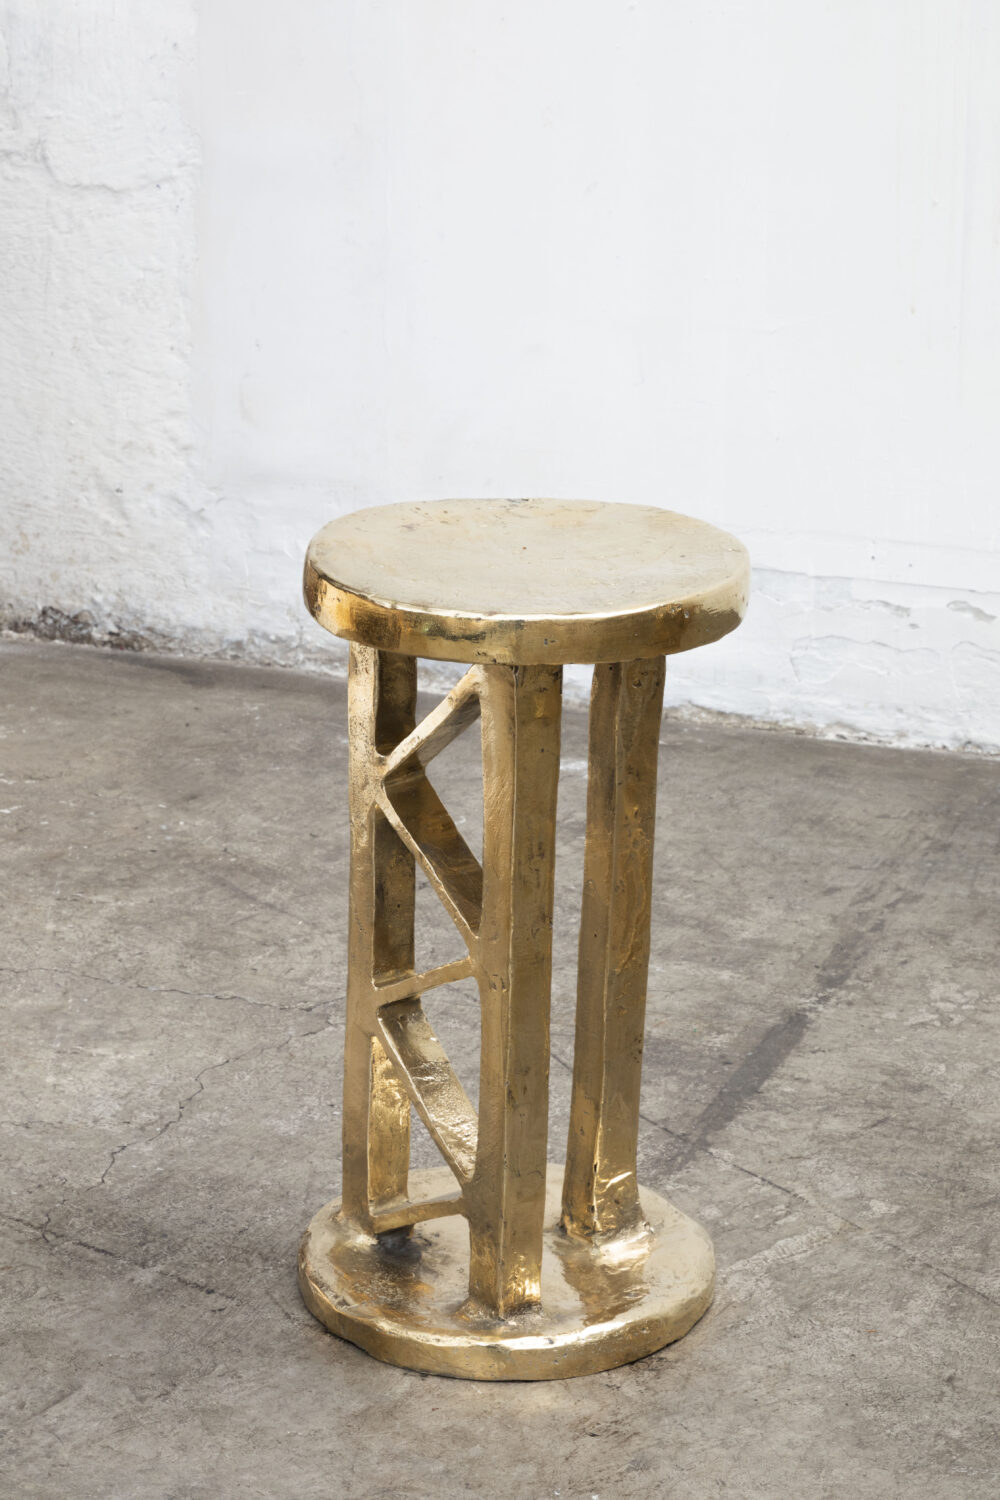 Casted Bronze Stool 1, 2022